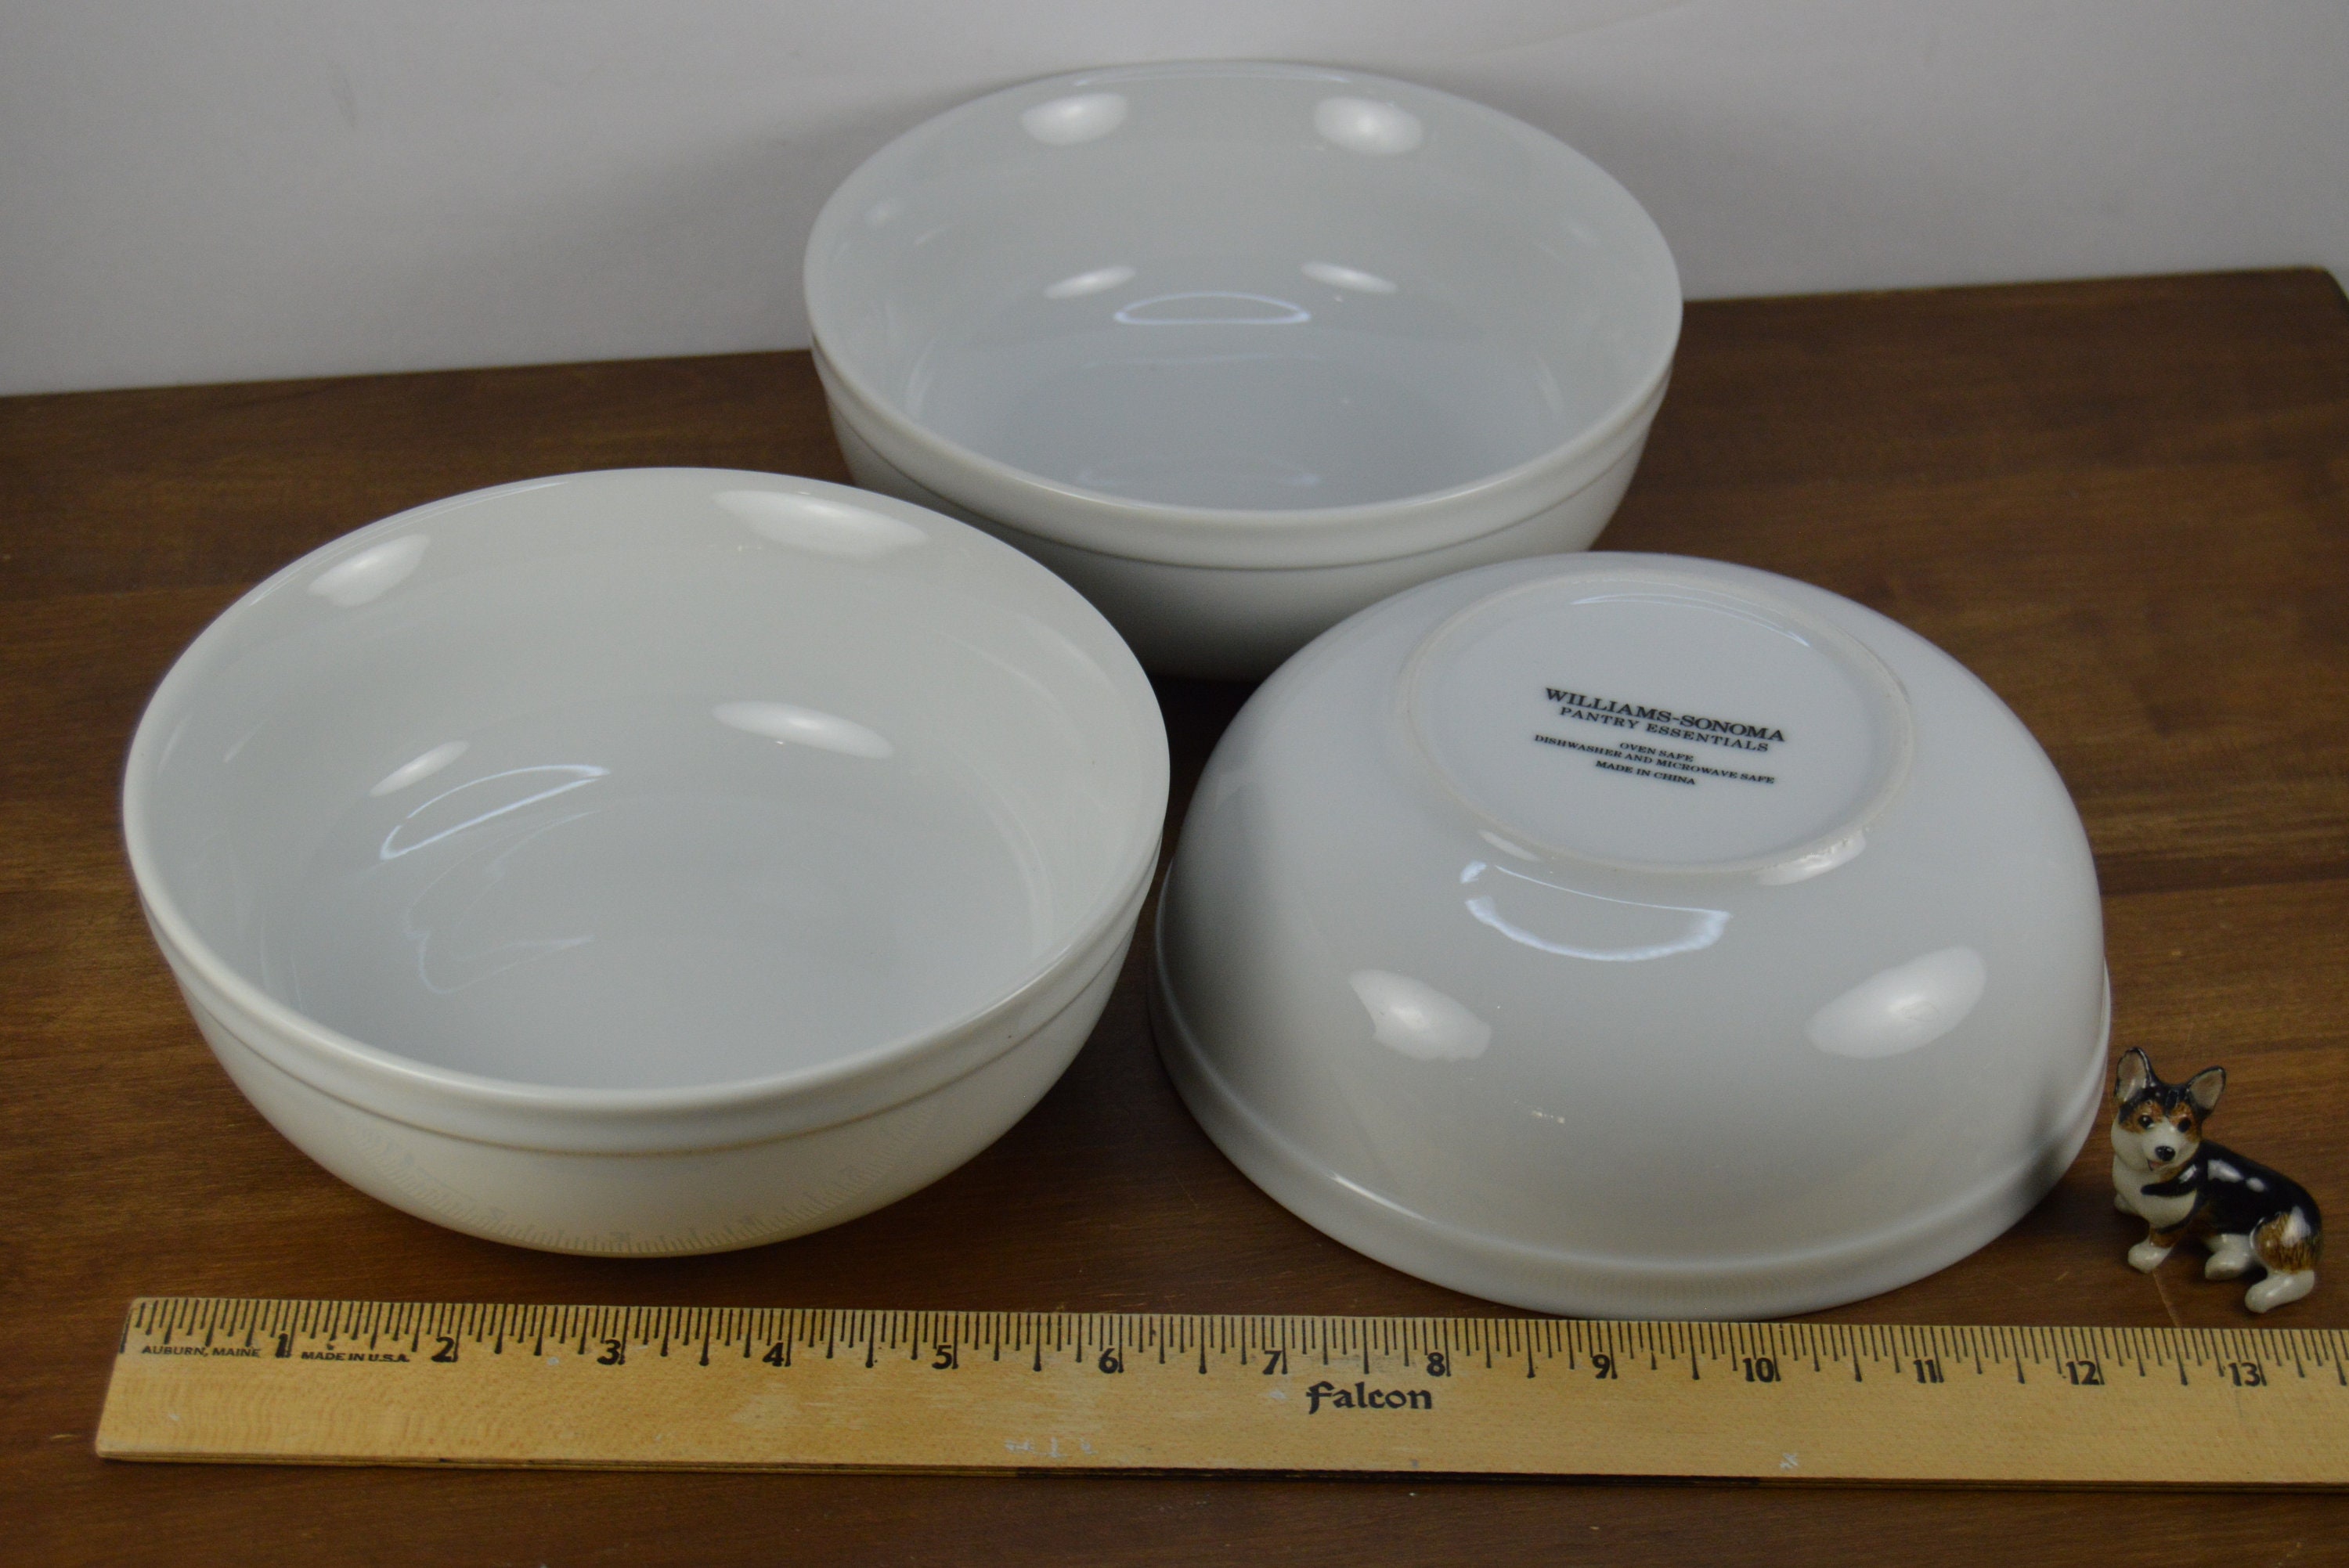 Set of 4 Williams-sonoma PANTRY ESSENTIALS 6.25 Cereal Soup Bowls